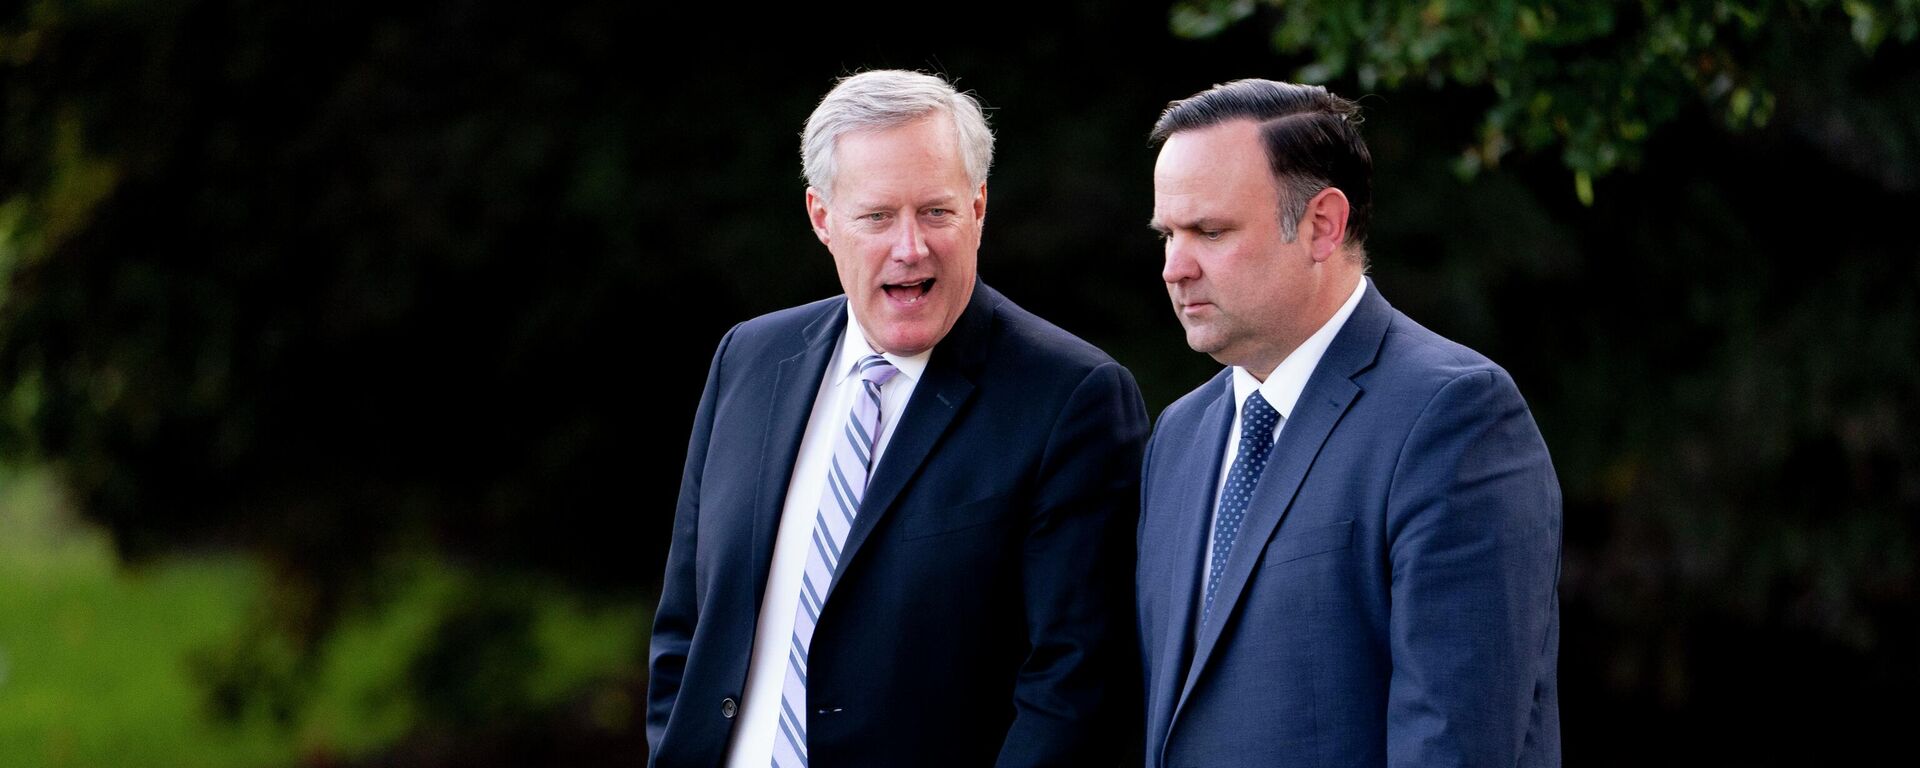 White House social media director Dan Scavino, right, and White House chief of staff Mark Meadows, left, walk to board Marine One with President Donald Trump on the South Lawn of the White House, Tuesday, Sept. 22, 2020, in Washington. - Sputnik International, 1920, 04.06.2022